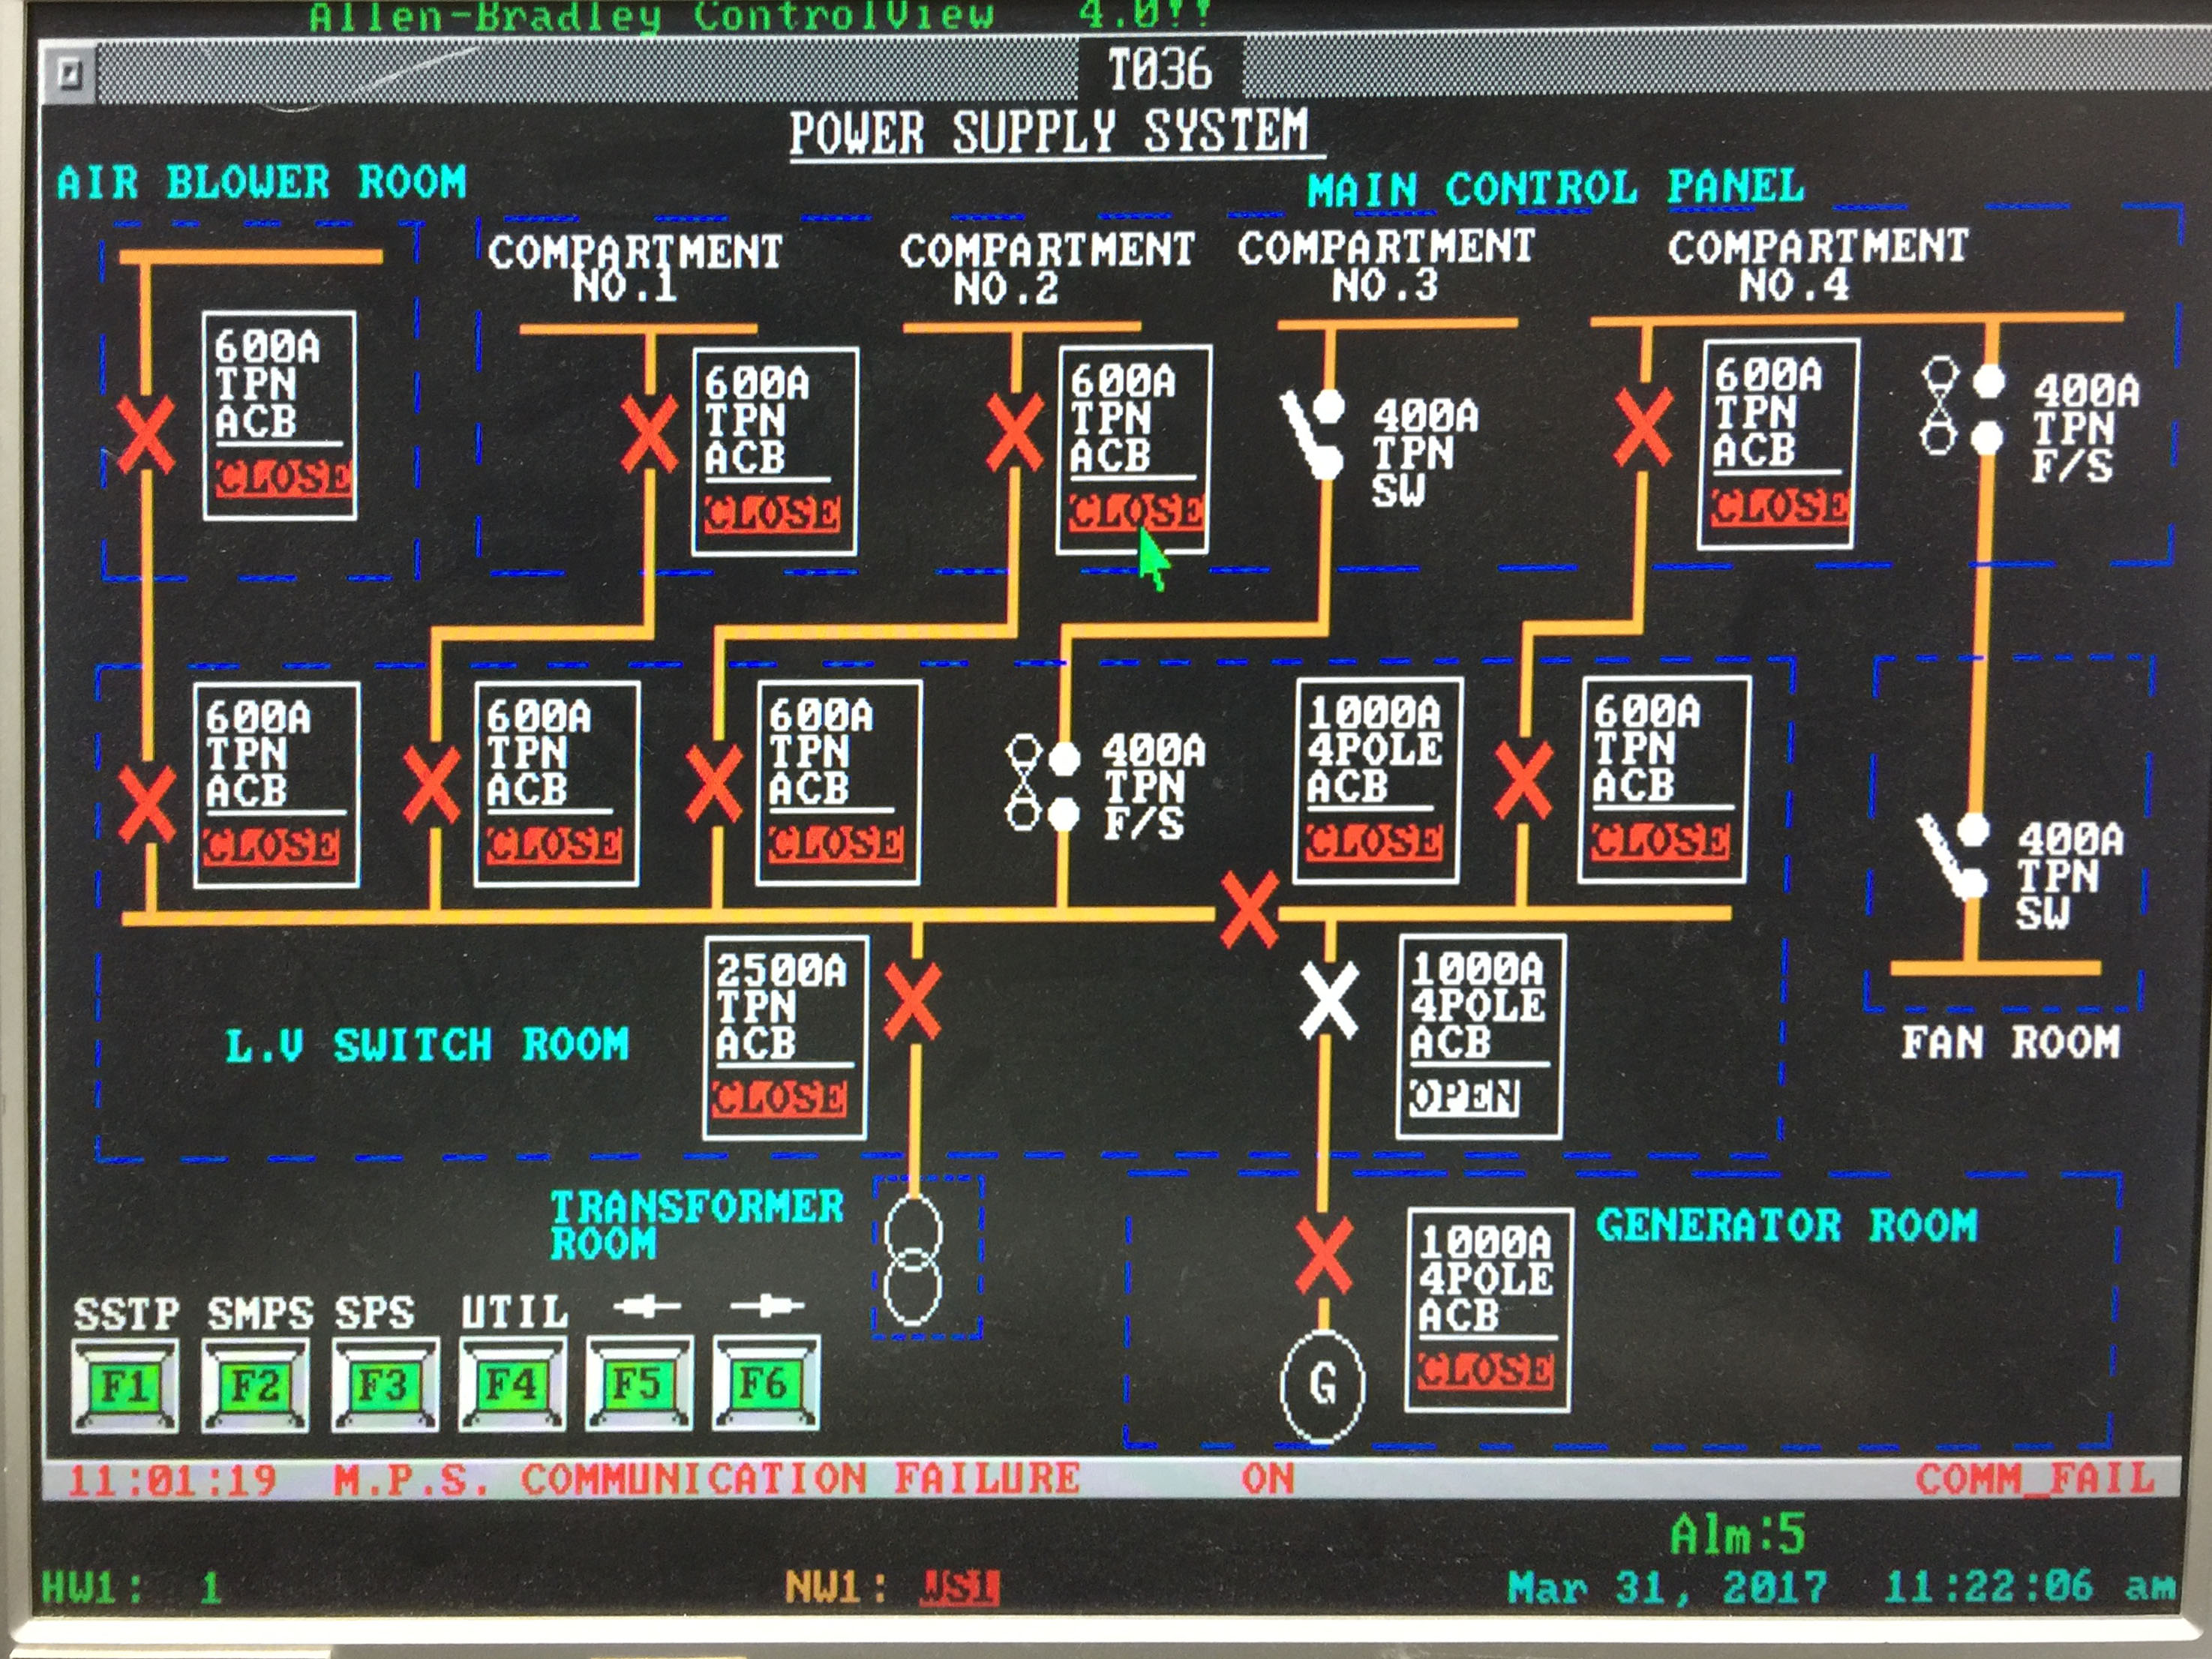 Power Supply System screenshot from ControlView Before Works in DSD Stanley STW